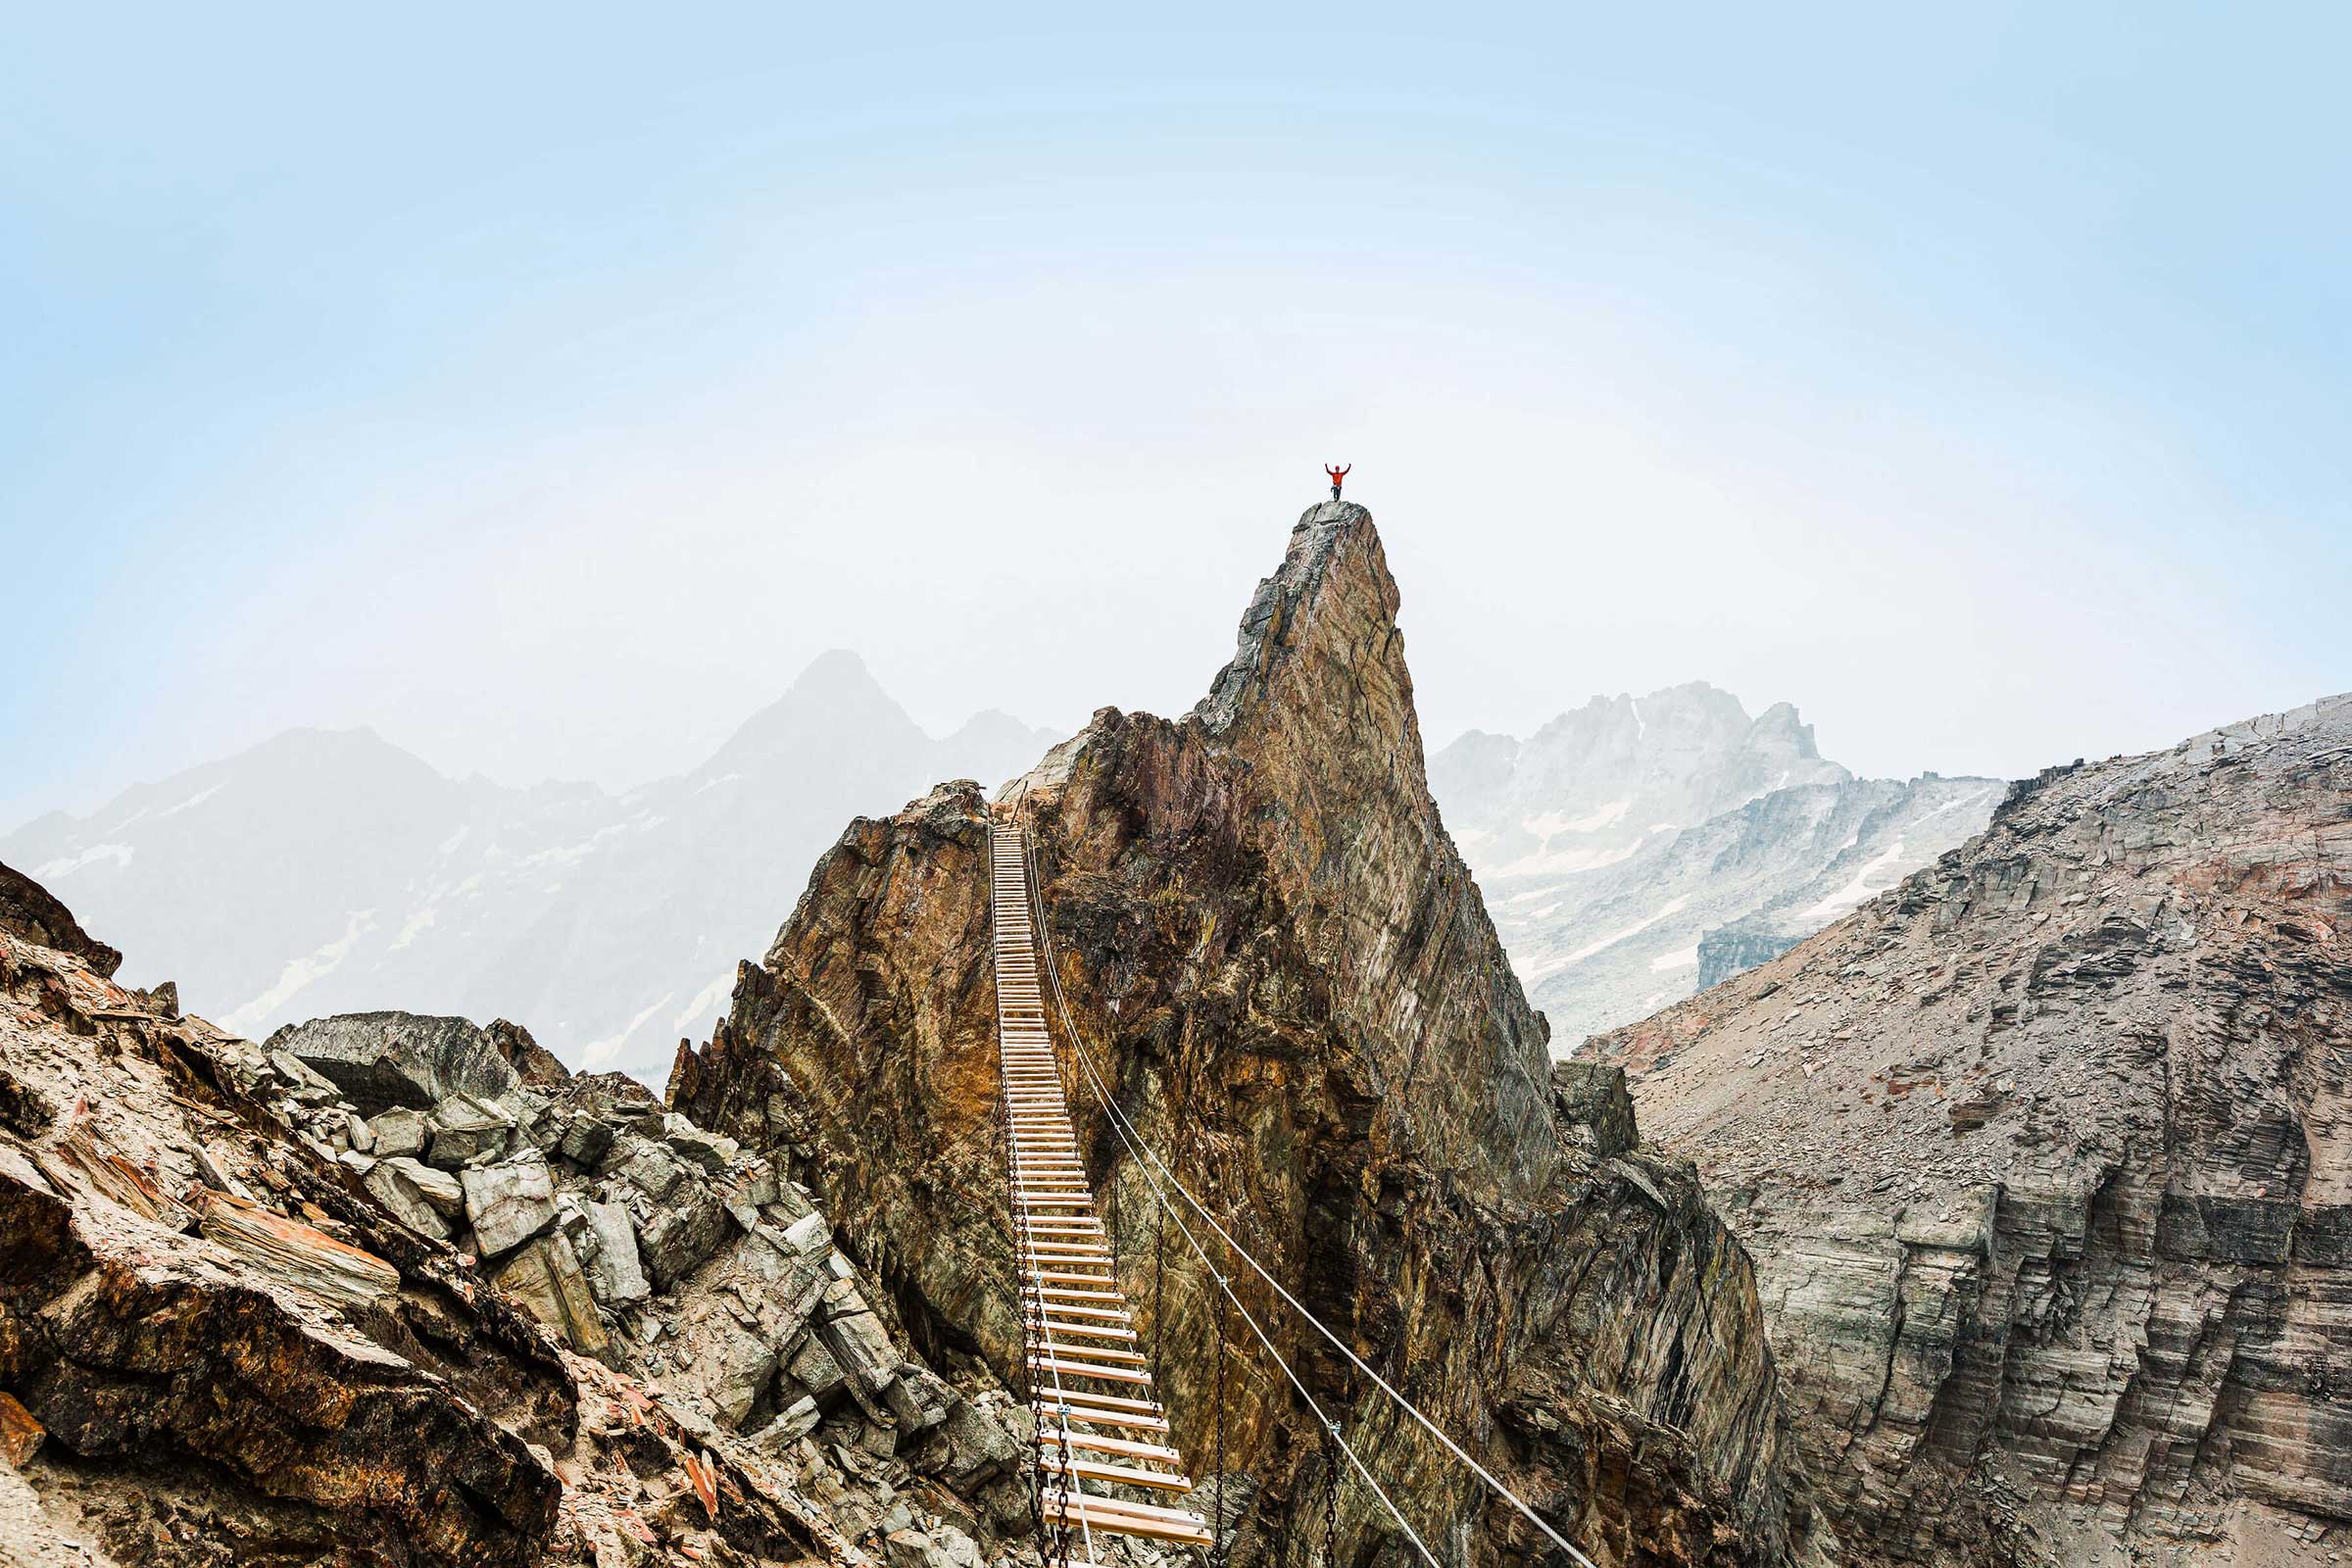 Wooden suspension bridge spanning across mountain peaks leading to a person triumphantly standing atop the mountain.